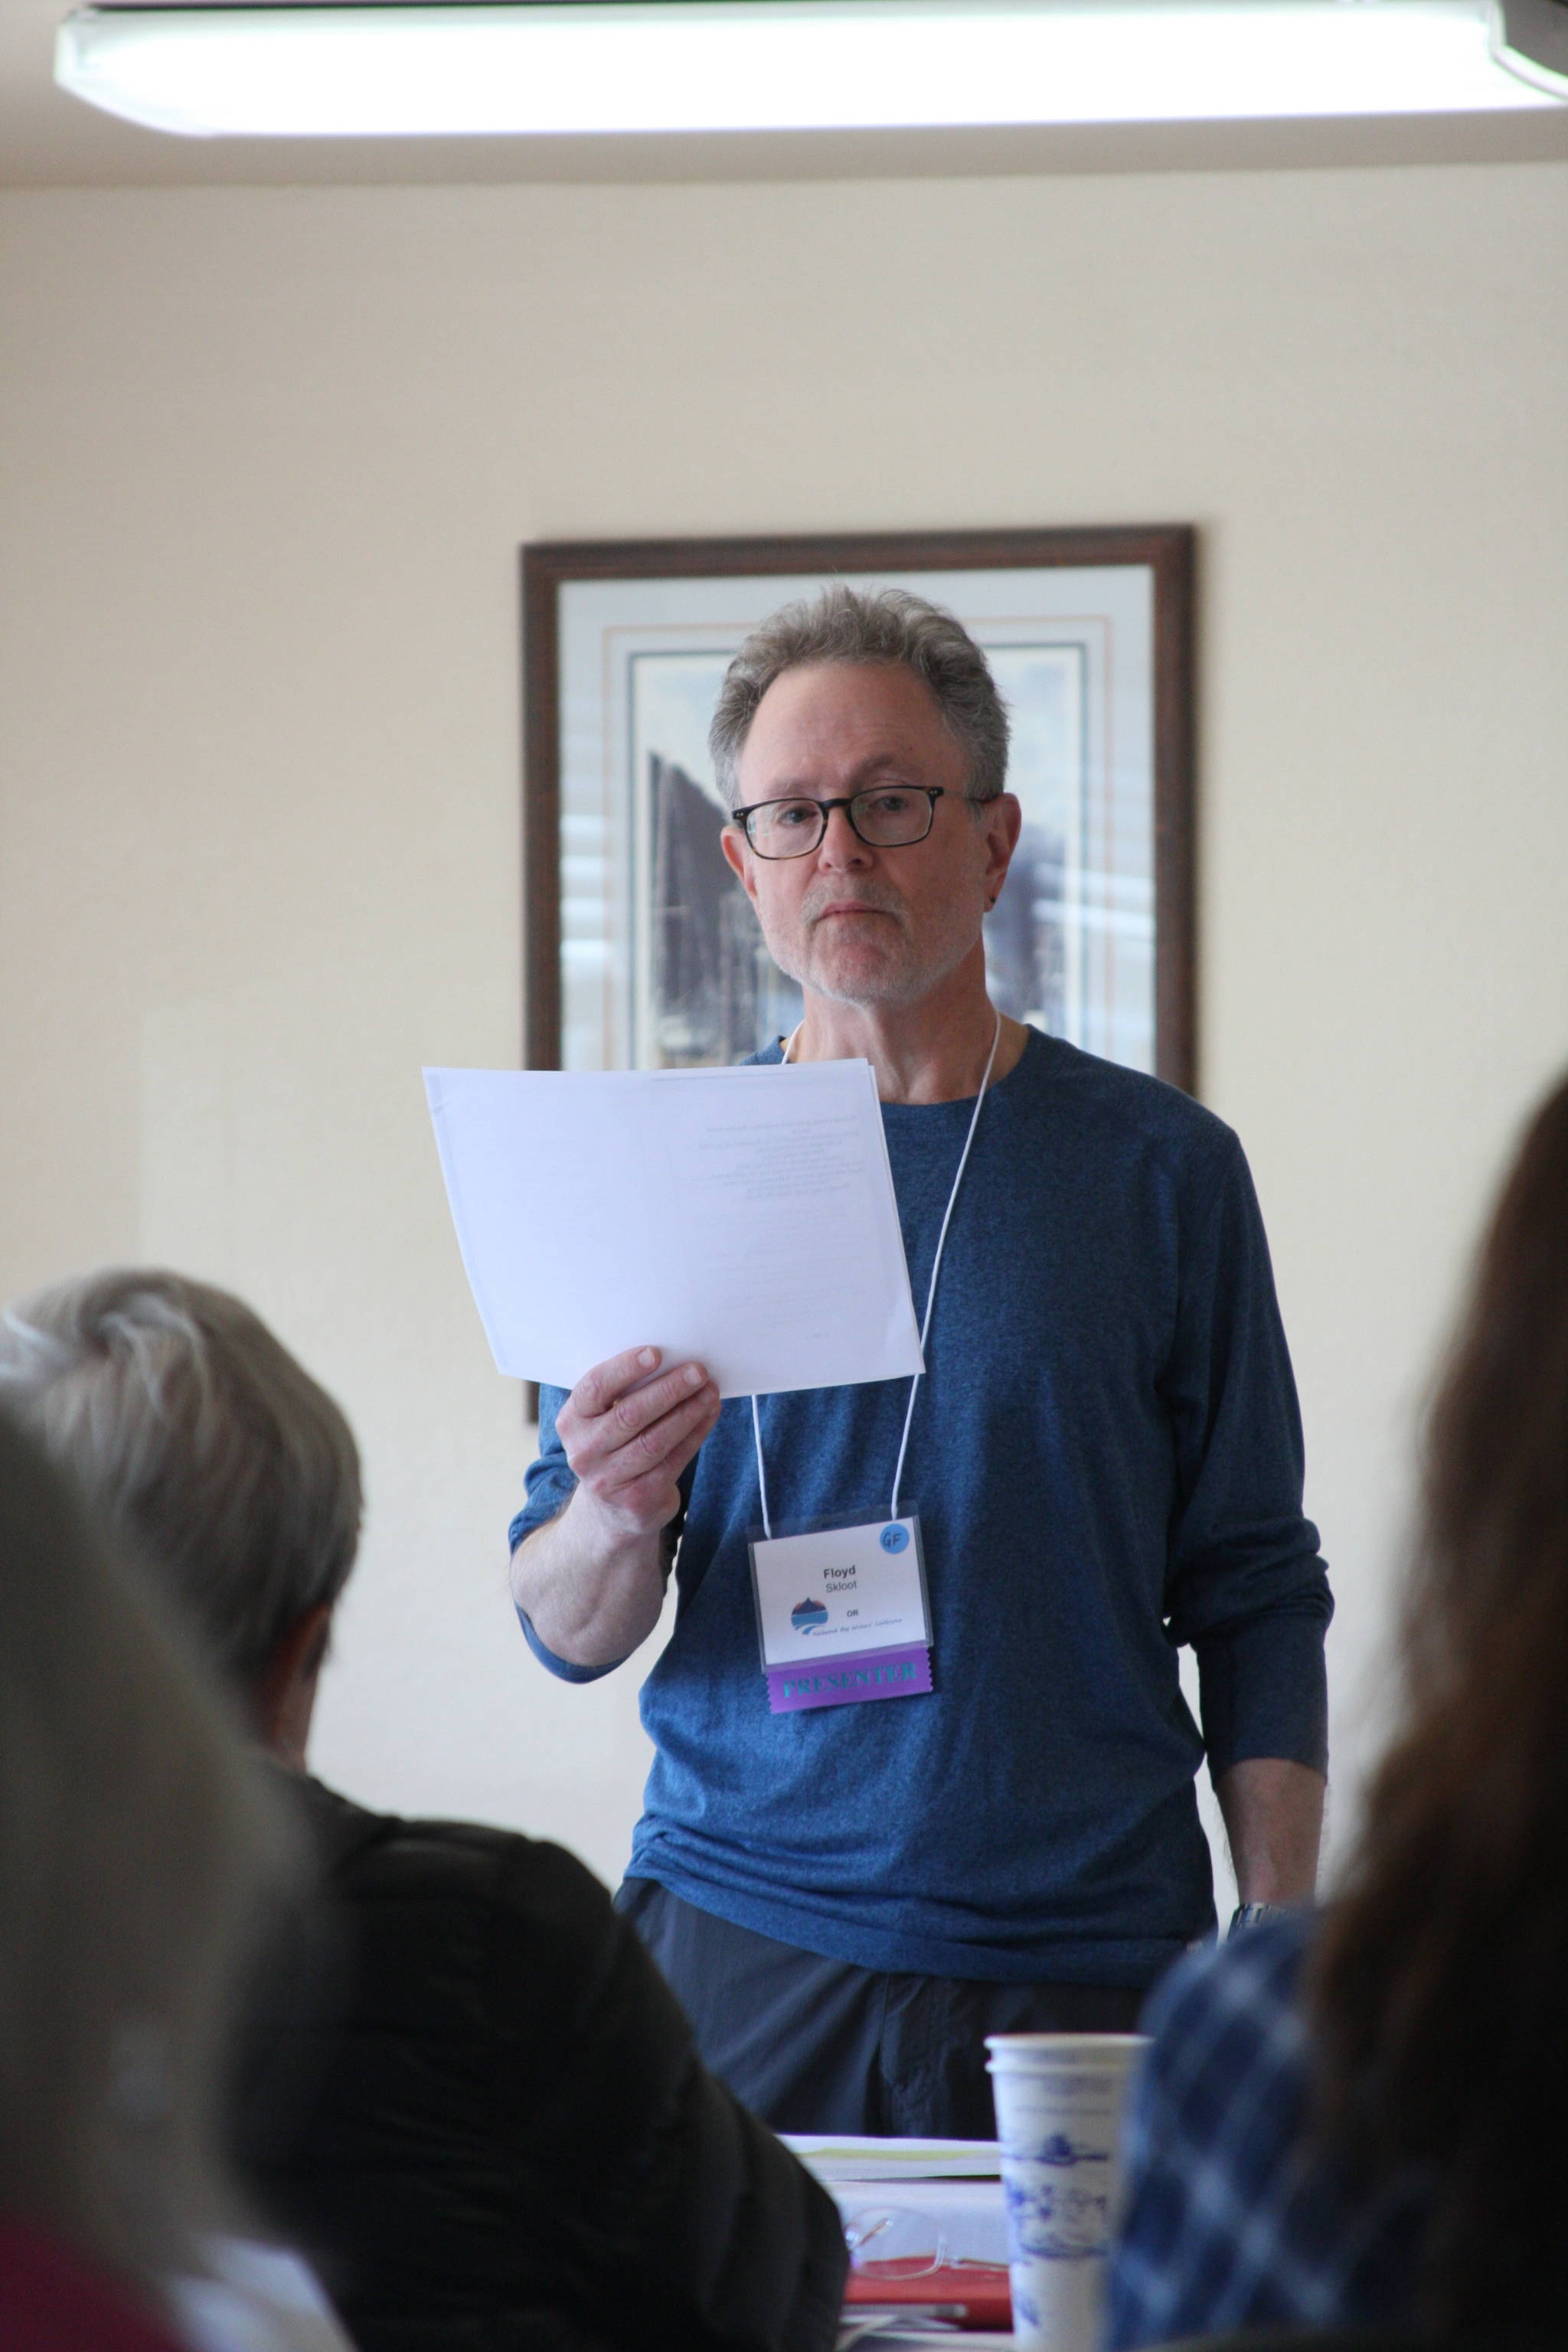 Brooklyn-native poet and novelist Floyd Skloot teaches attending writers to find the hidden music within poetry during his workshop, “The Territory of Hidden Music”, at the Kachemak Bay Writers’ Conference on Saturday, June 9, 2018 at Land’s End Resort in Homer, Alaska. (Photo by Delcenia Cosman)